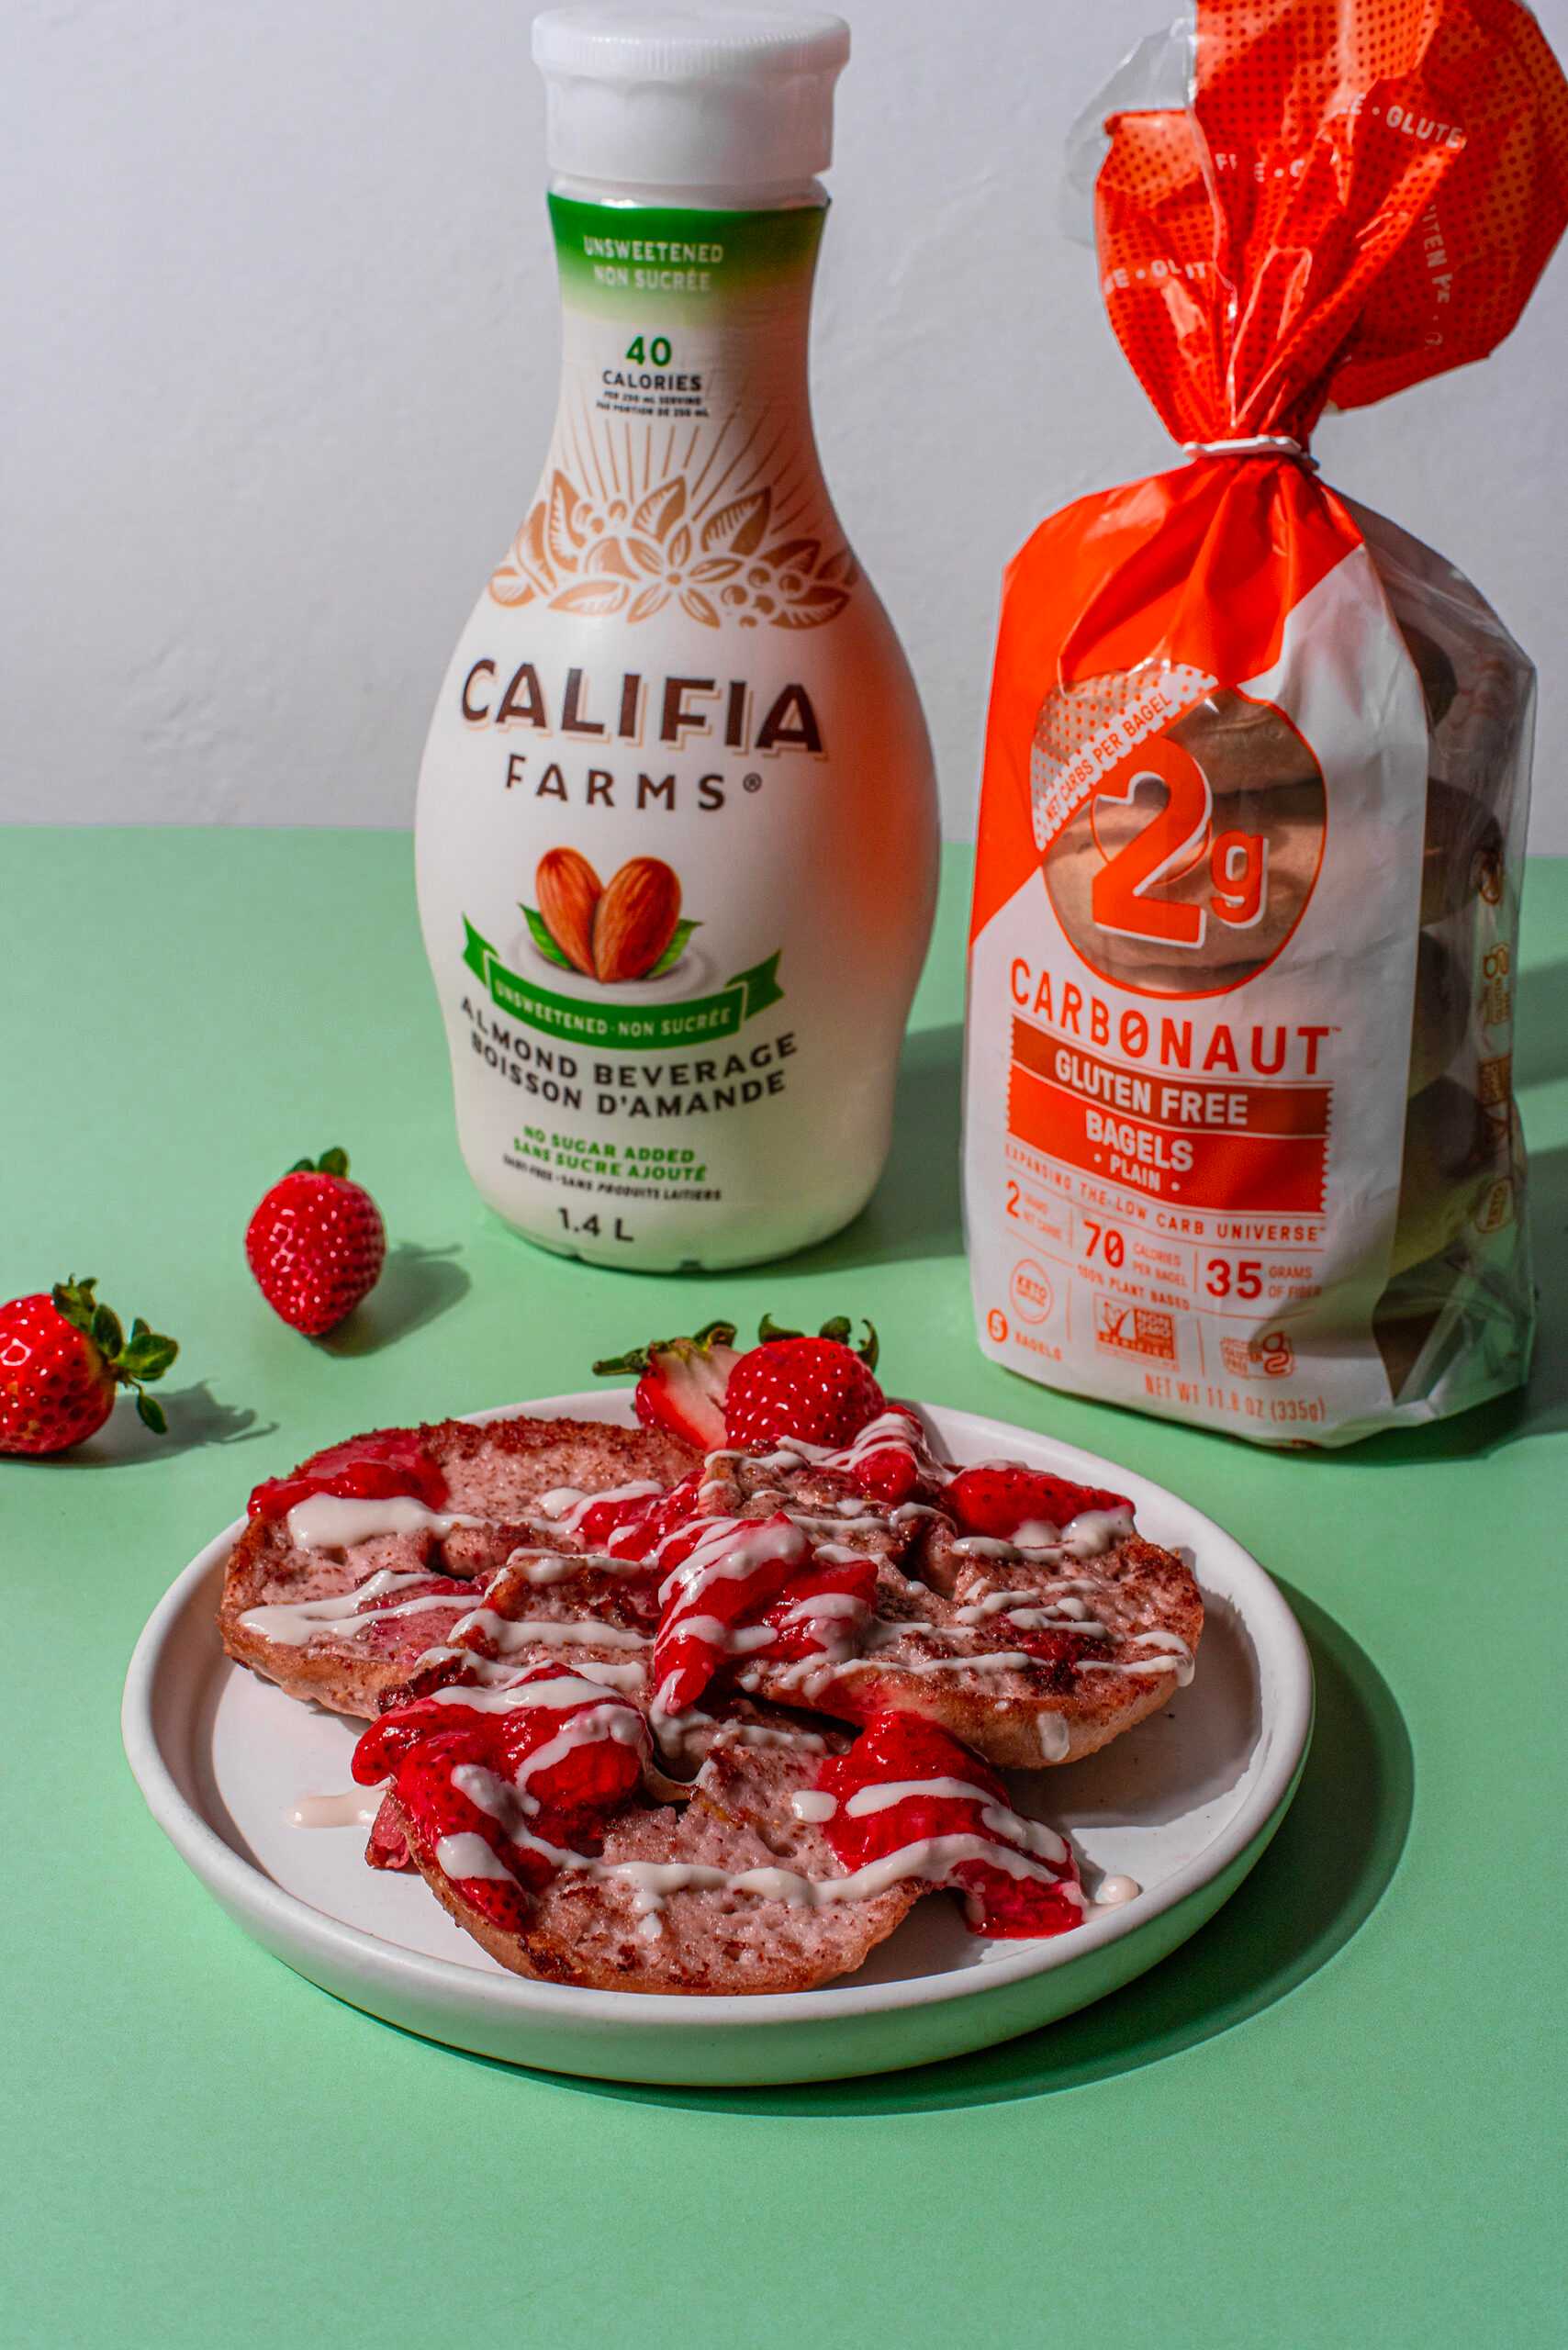 Strawberry bagel french toast sits in the center of the image, with Califia Farms Unsweetened Almond Beverage and Carbonaut Gluten-Free, Low-Carb Plain Bagels in the background.